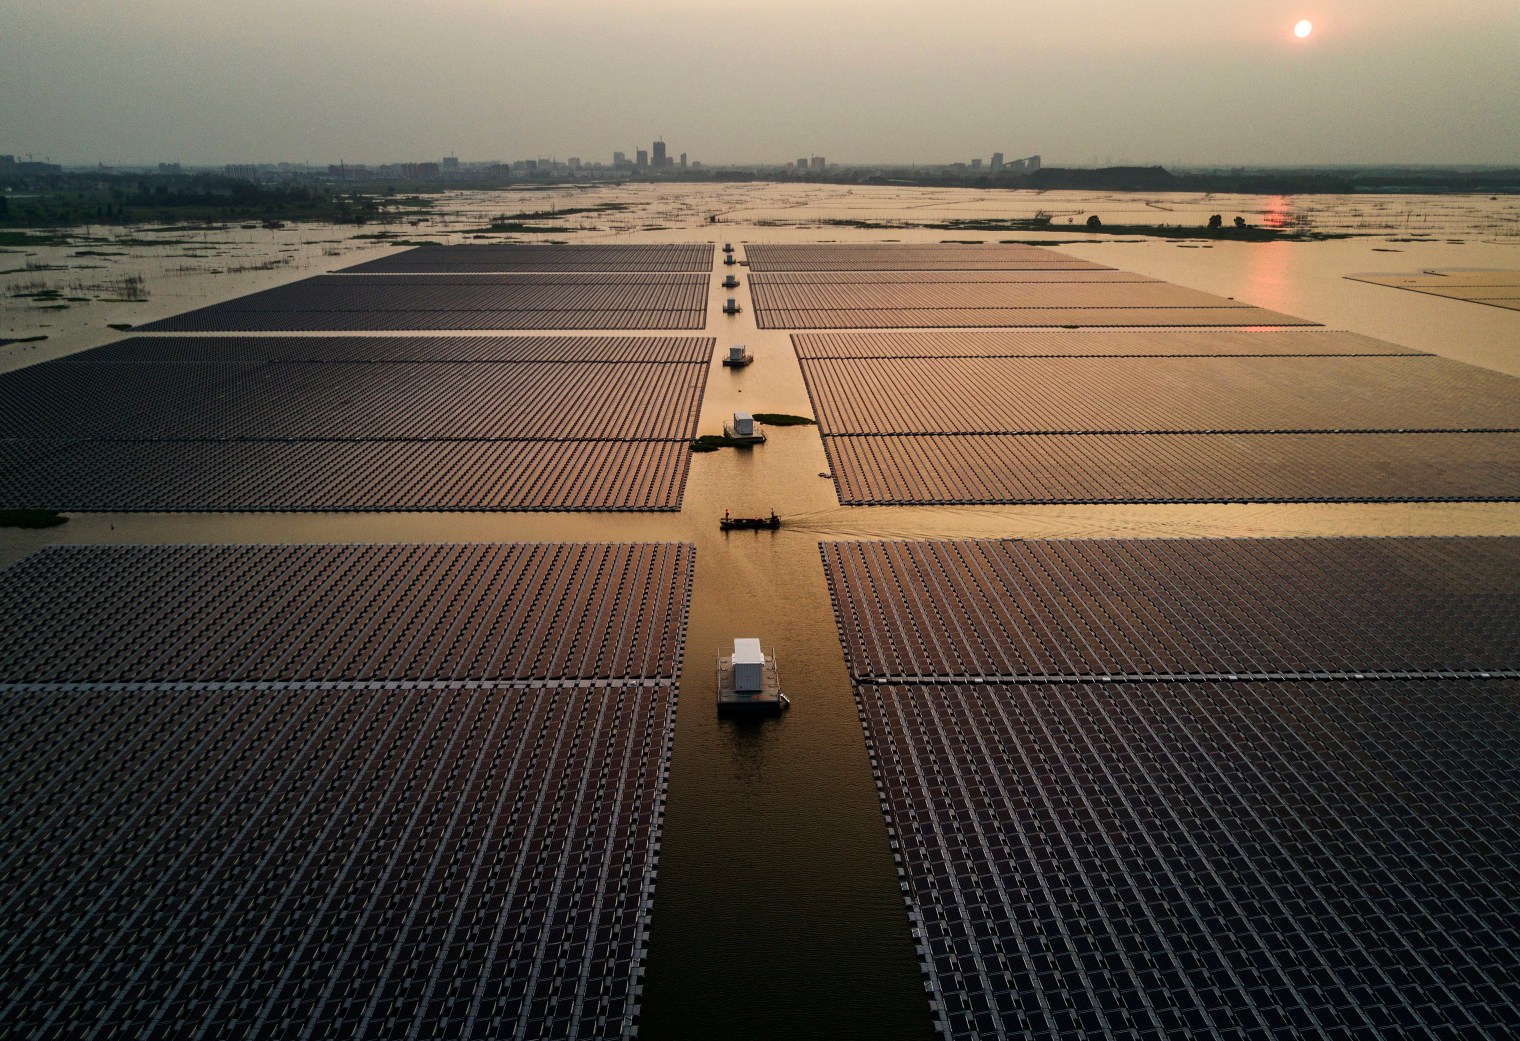 Workers ride in a boat through a large floating solar farm project.